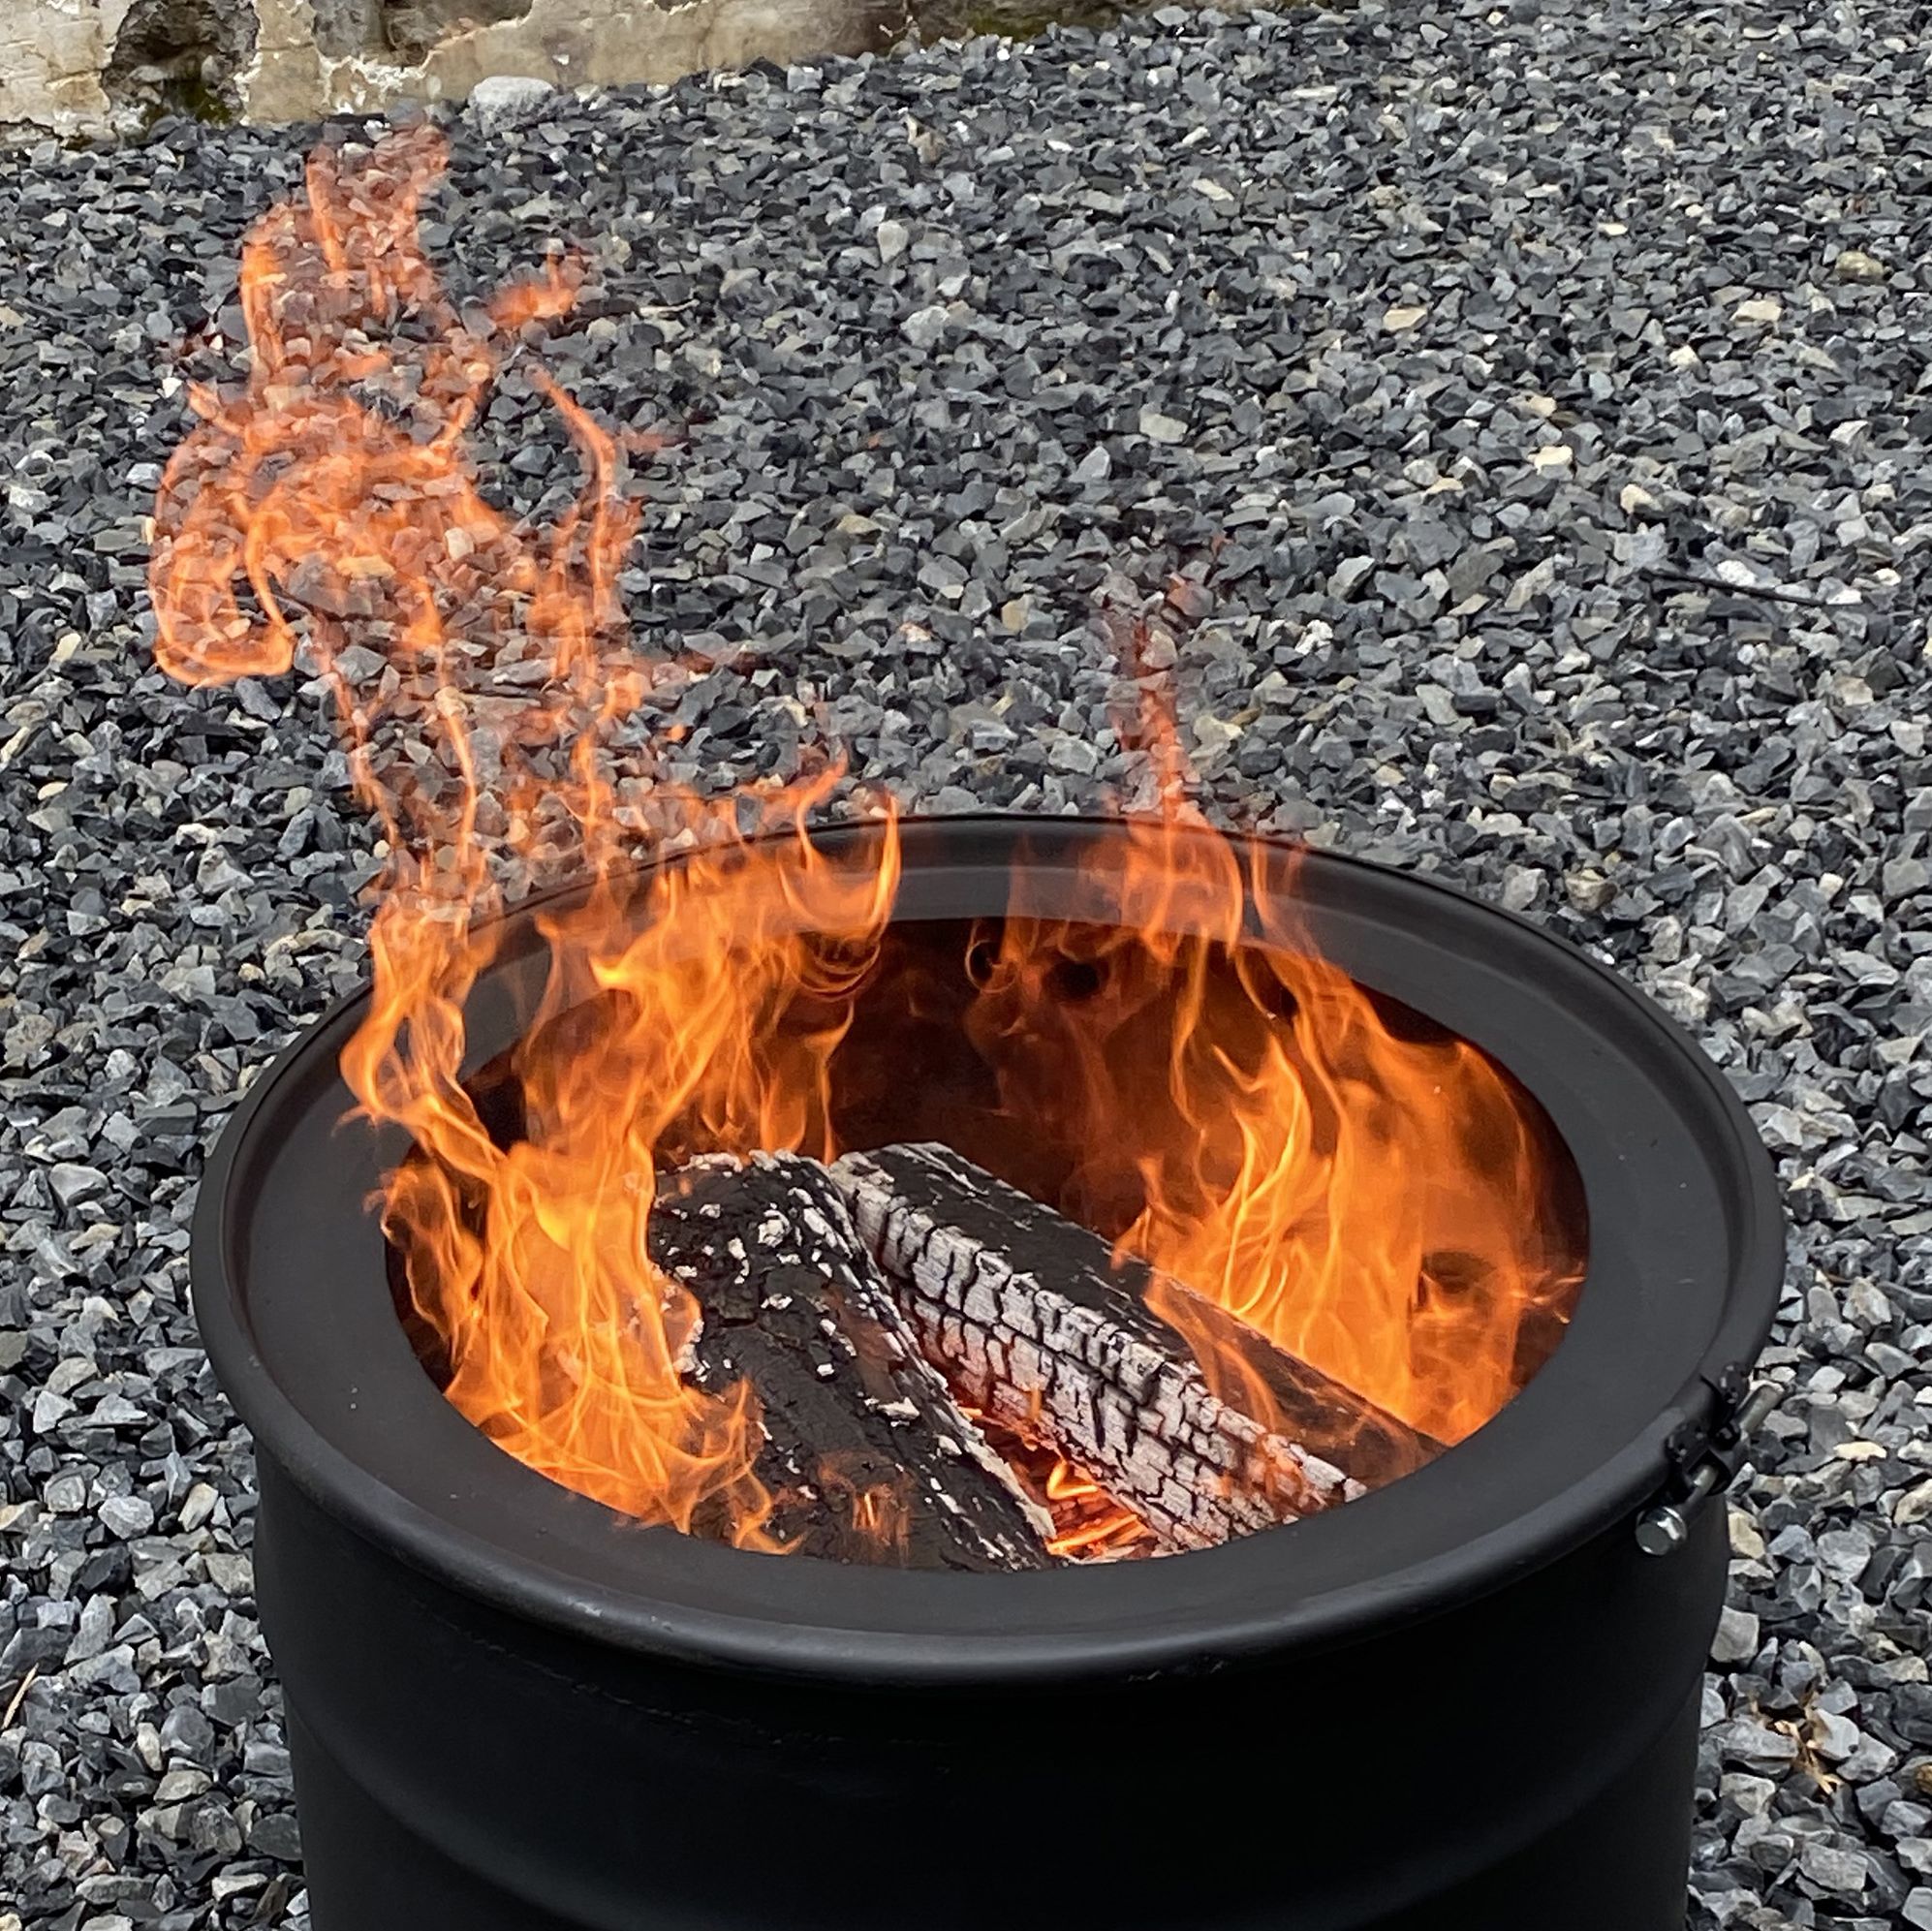 How to Build Your Own DIY Smokeless Fire Pit